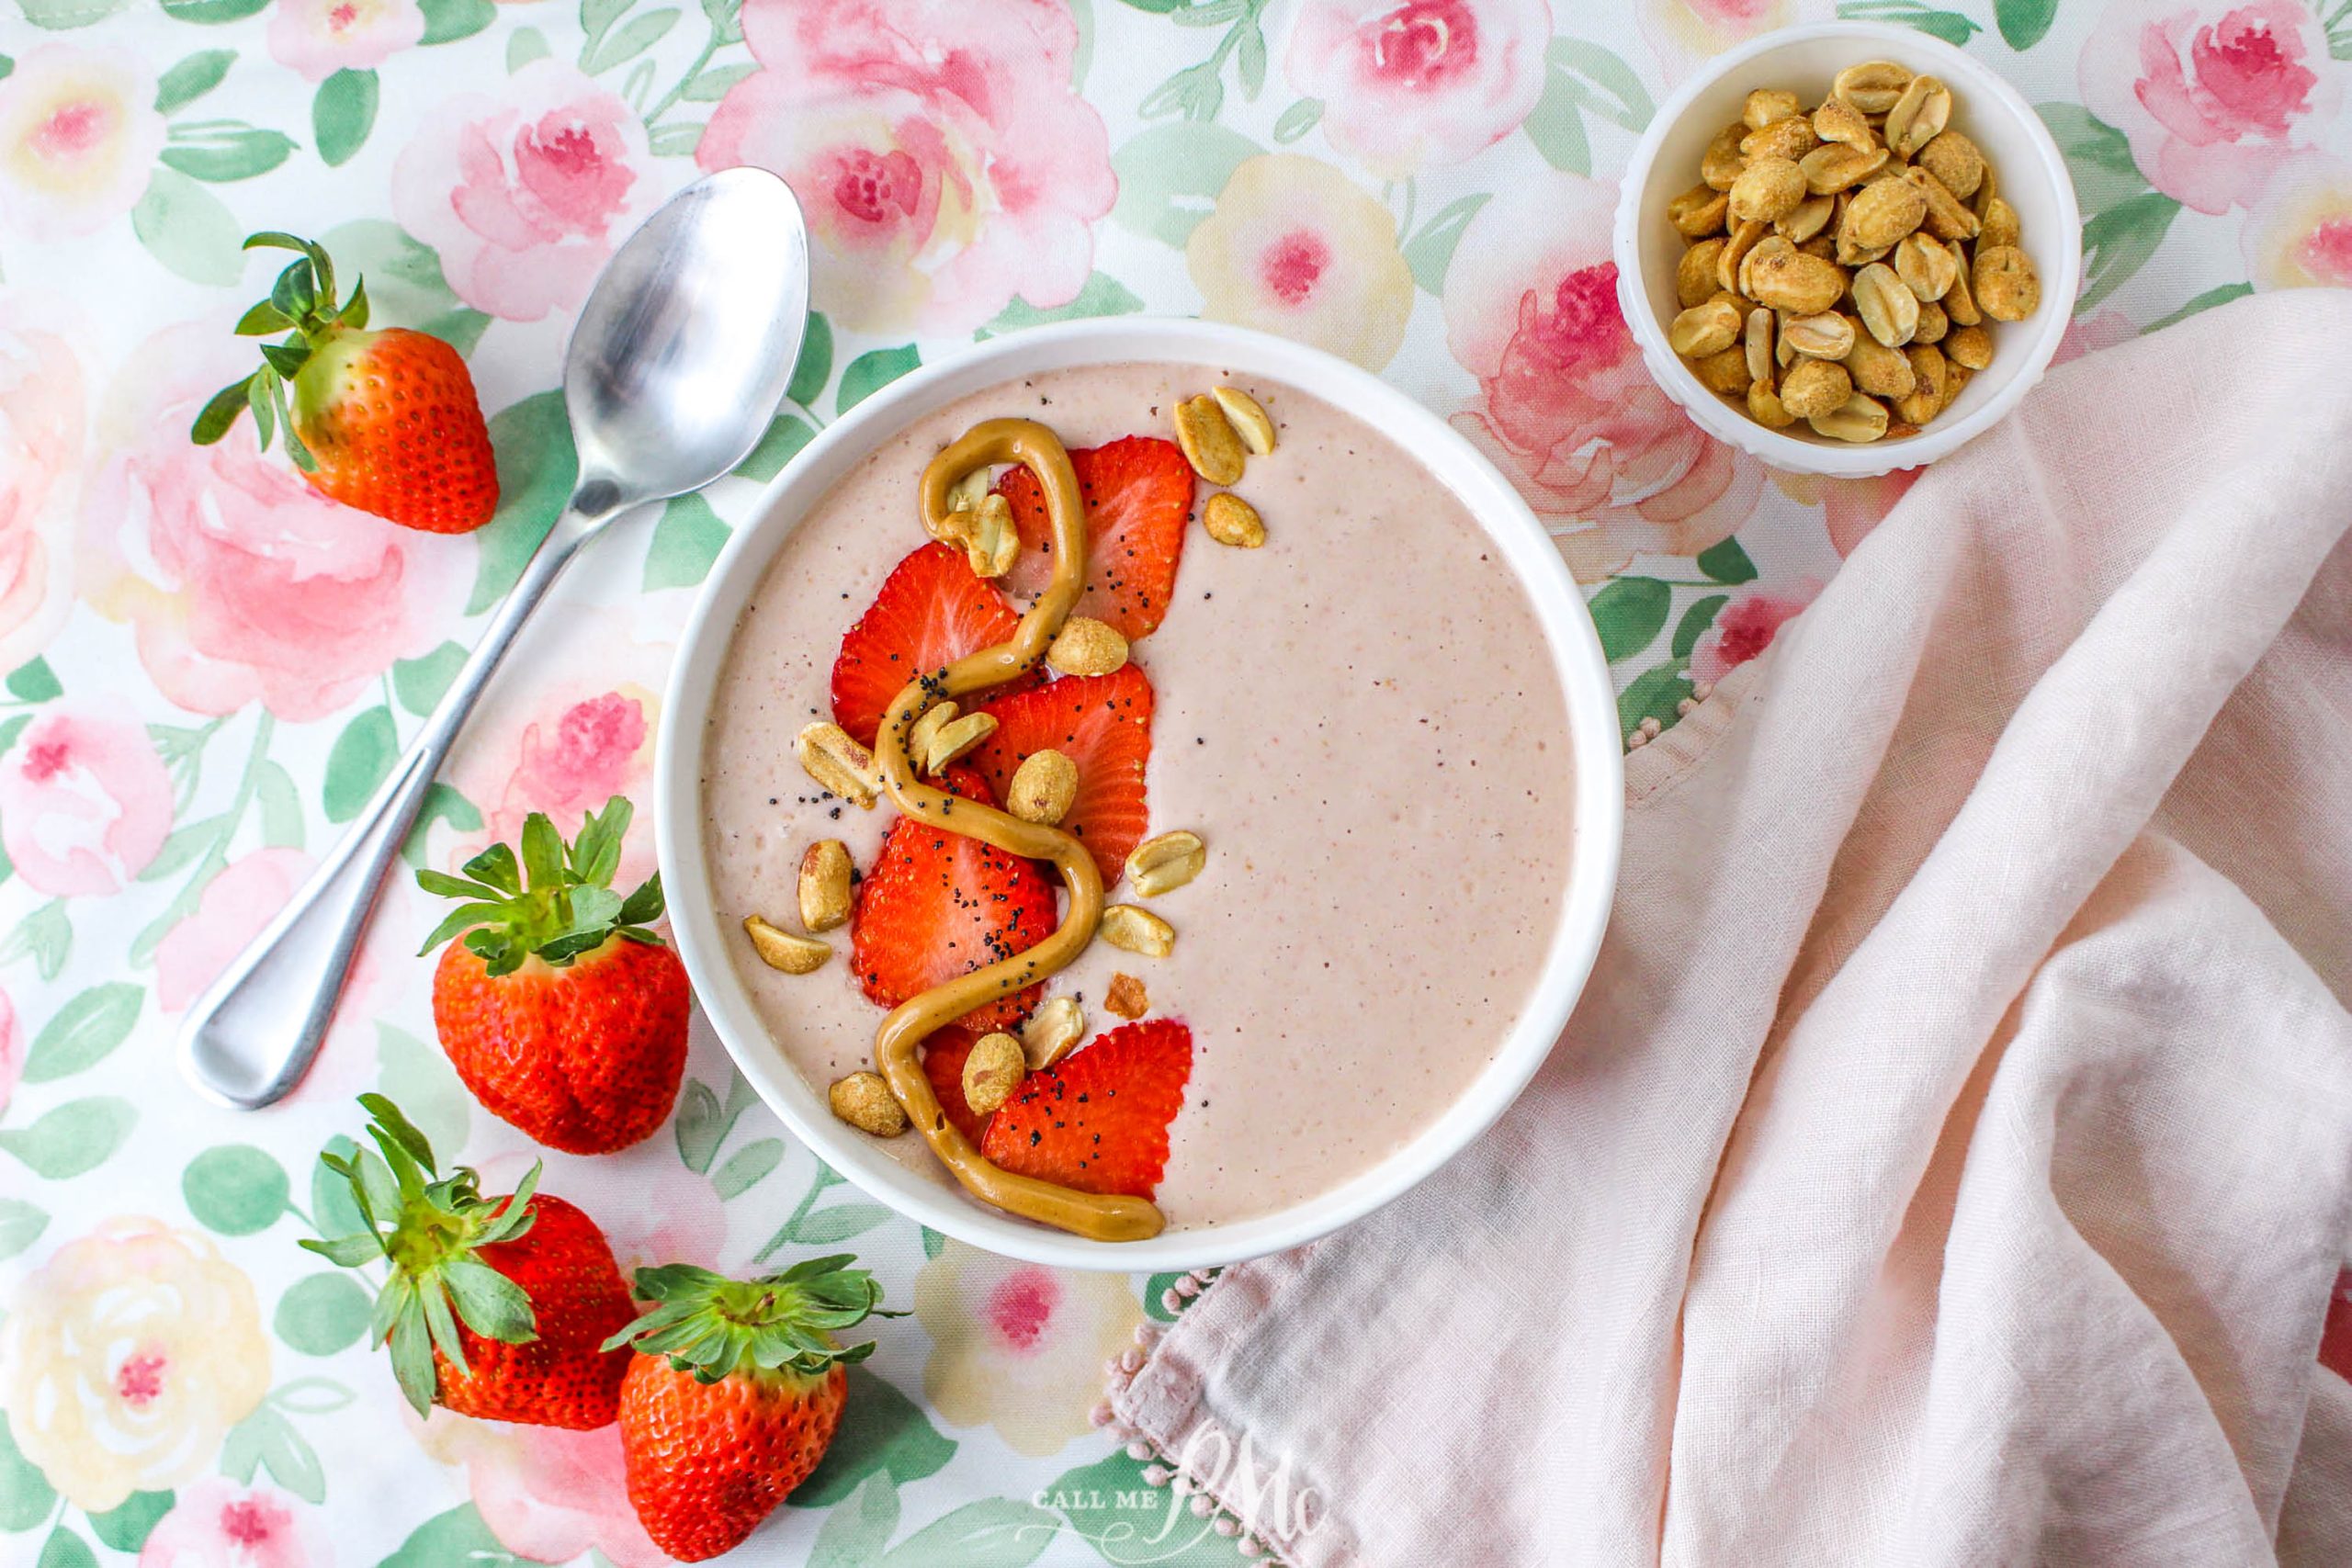 Smoothie  topped with strawberries, peanuts, and peanut butter swirl in bowl.